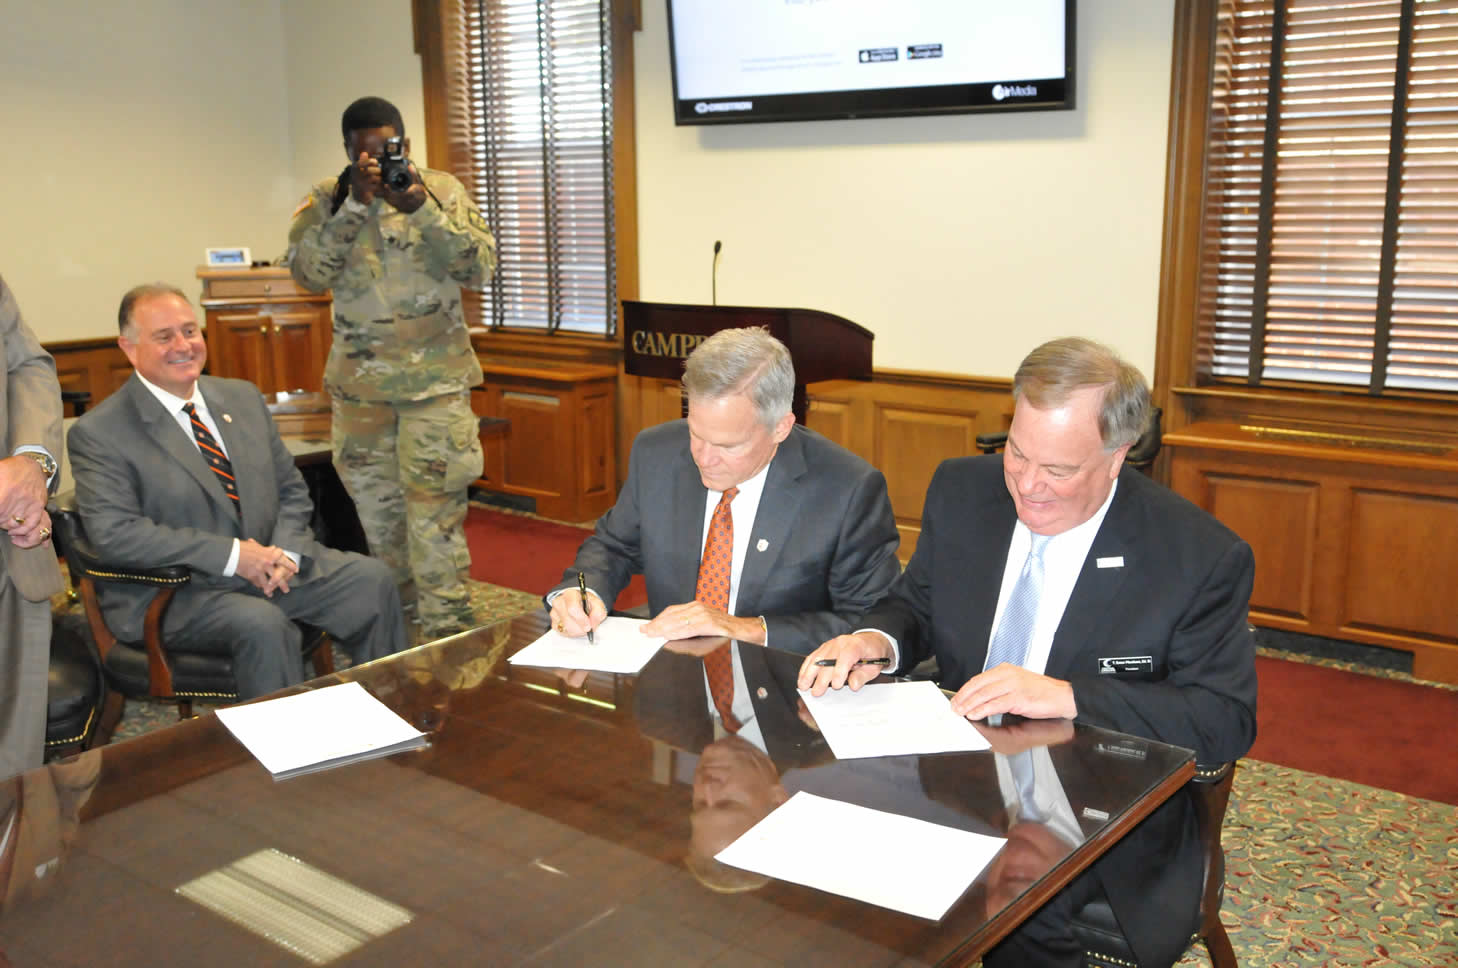 Click to enlarge,  Campbell University President J. Bradley Creed and Central Carolina Community College President Dr. T.E. Marchant sign an ROTC agreement. 